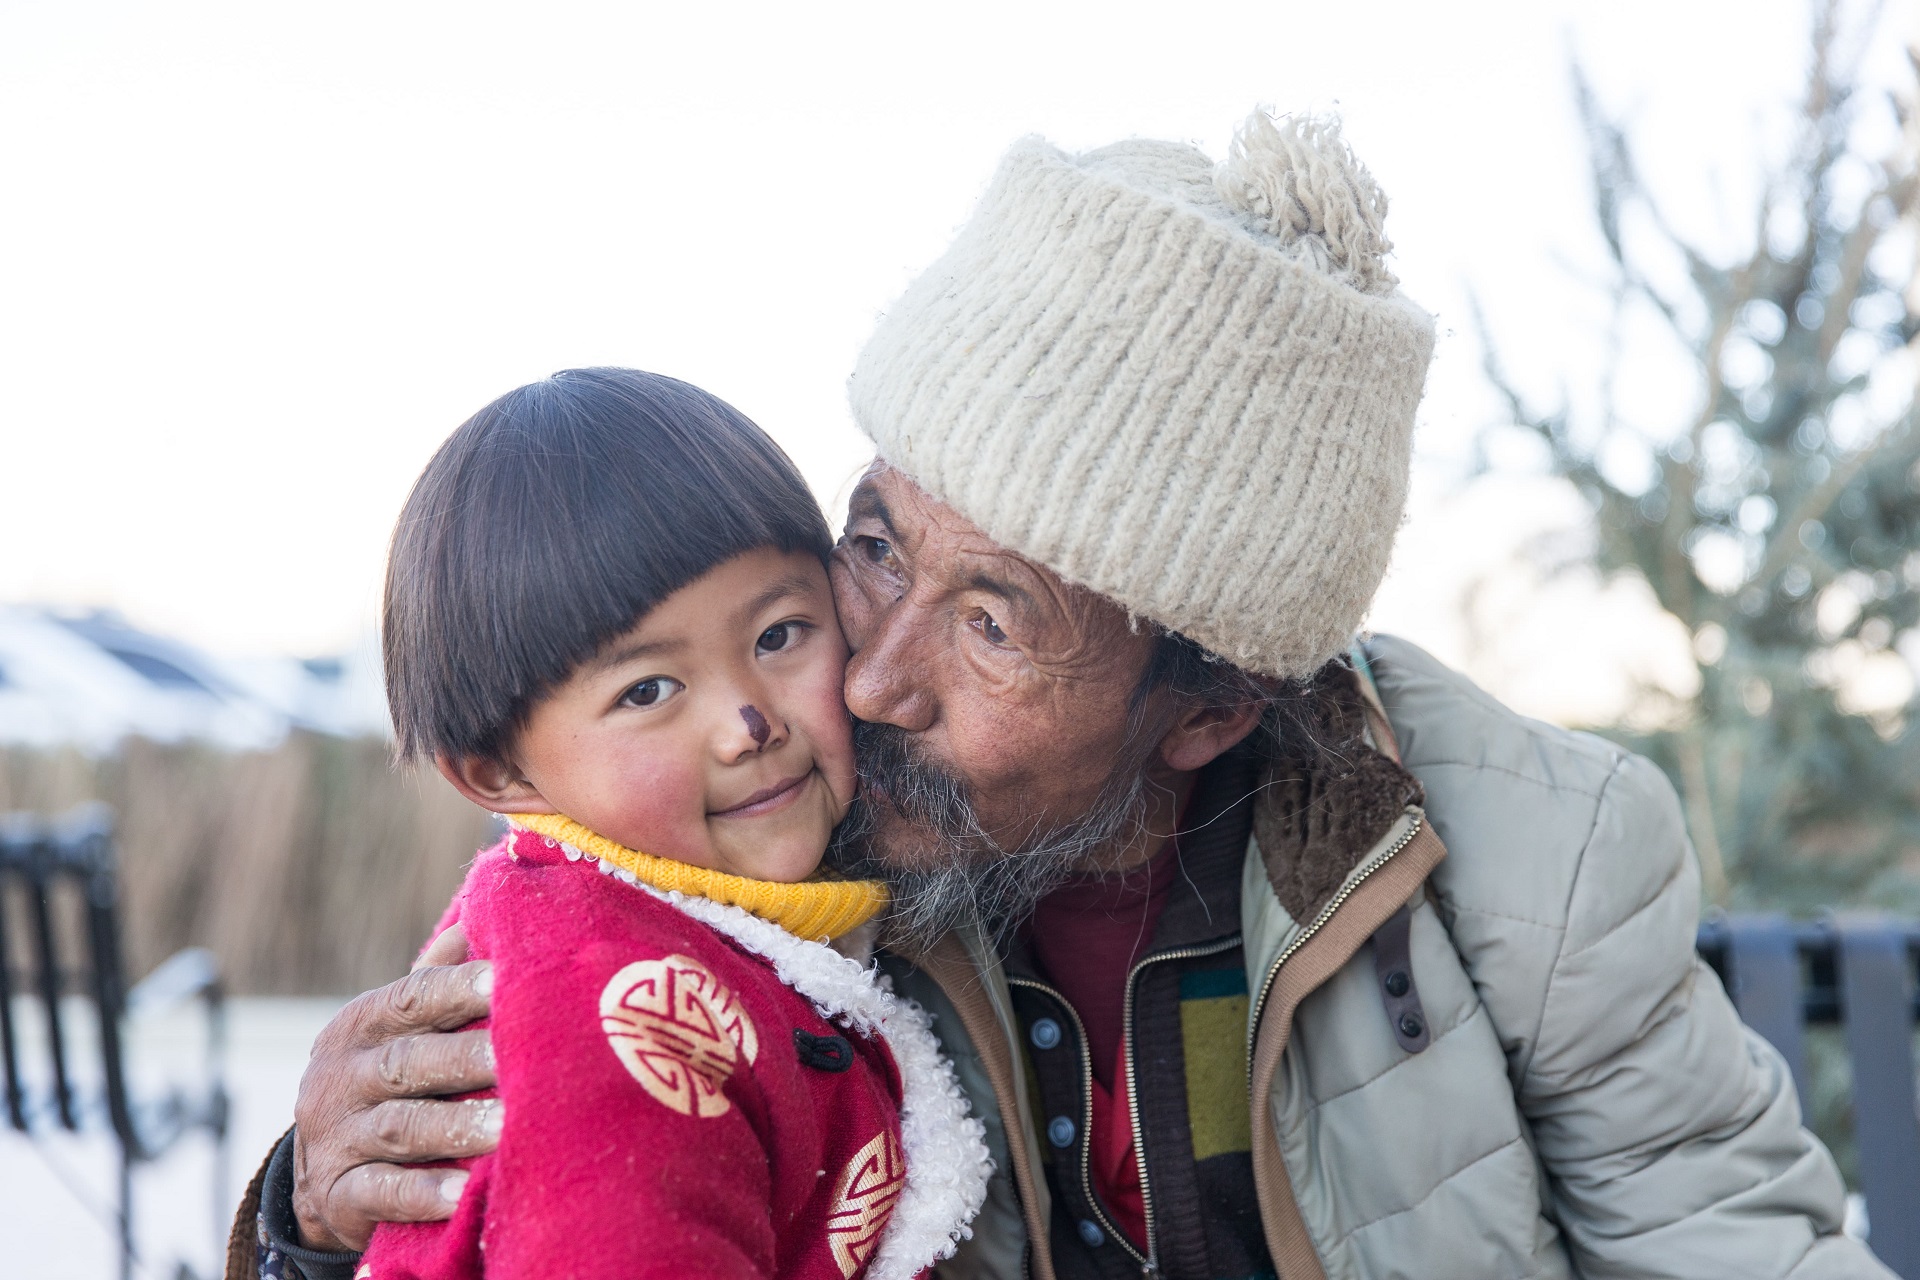 the 5-year-old Tibetan girl is held by her grandfather